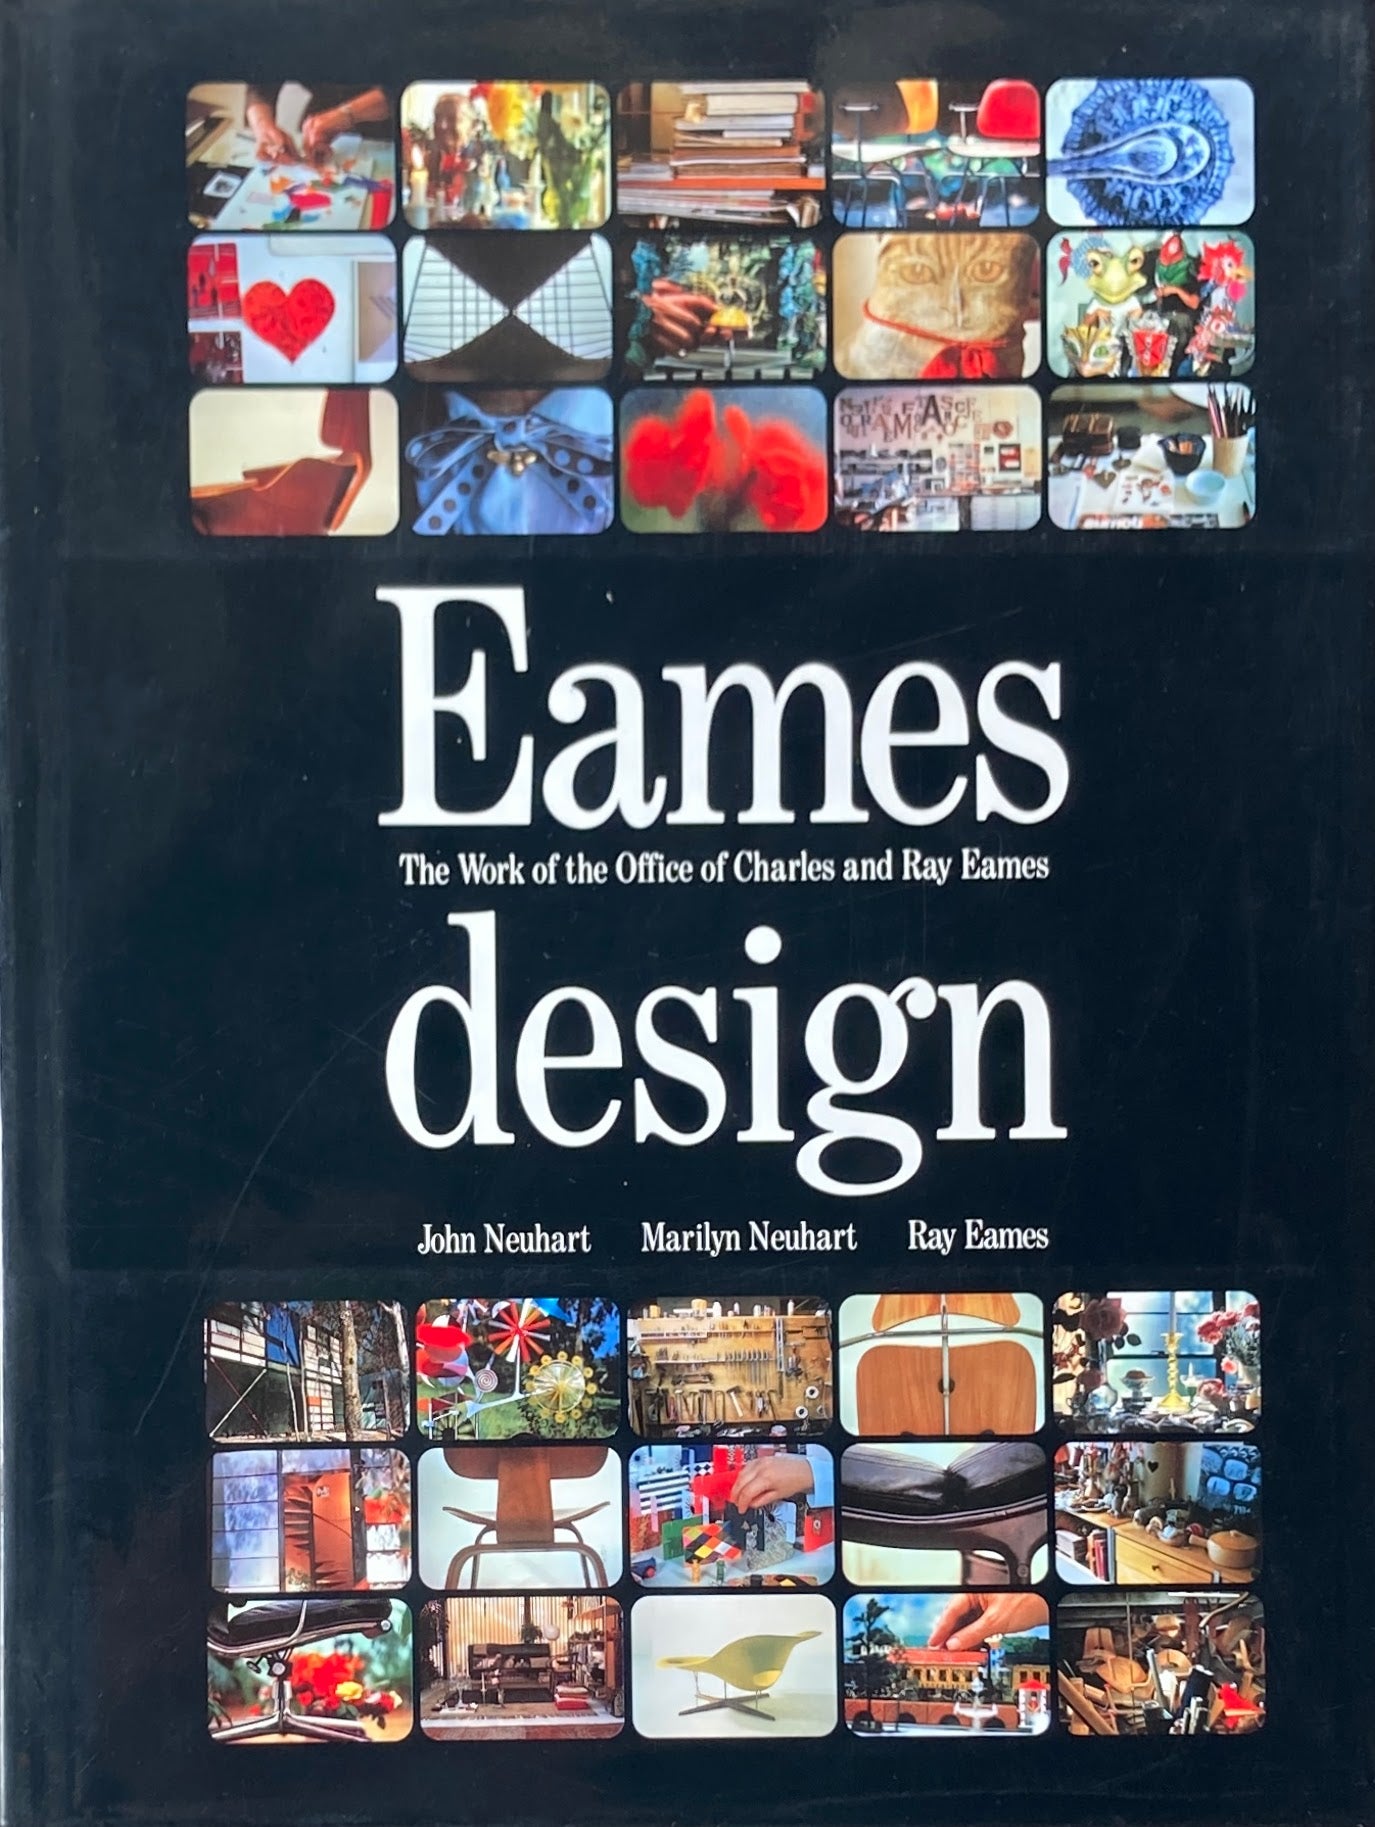 Eames Design : The Work of the Office of Charles and Ray